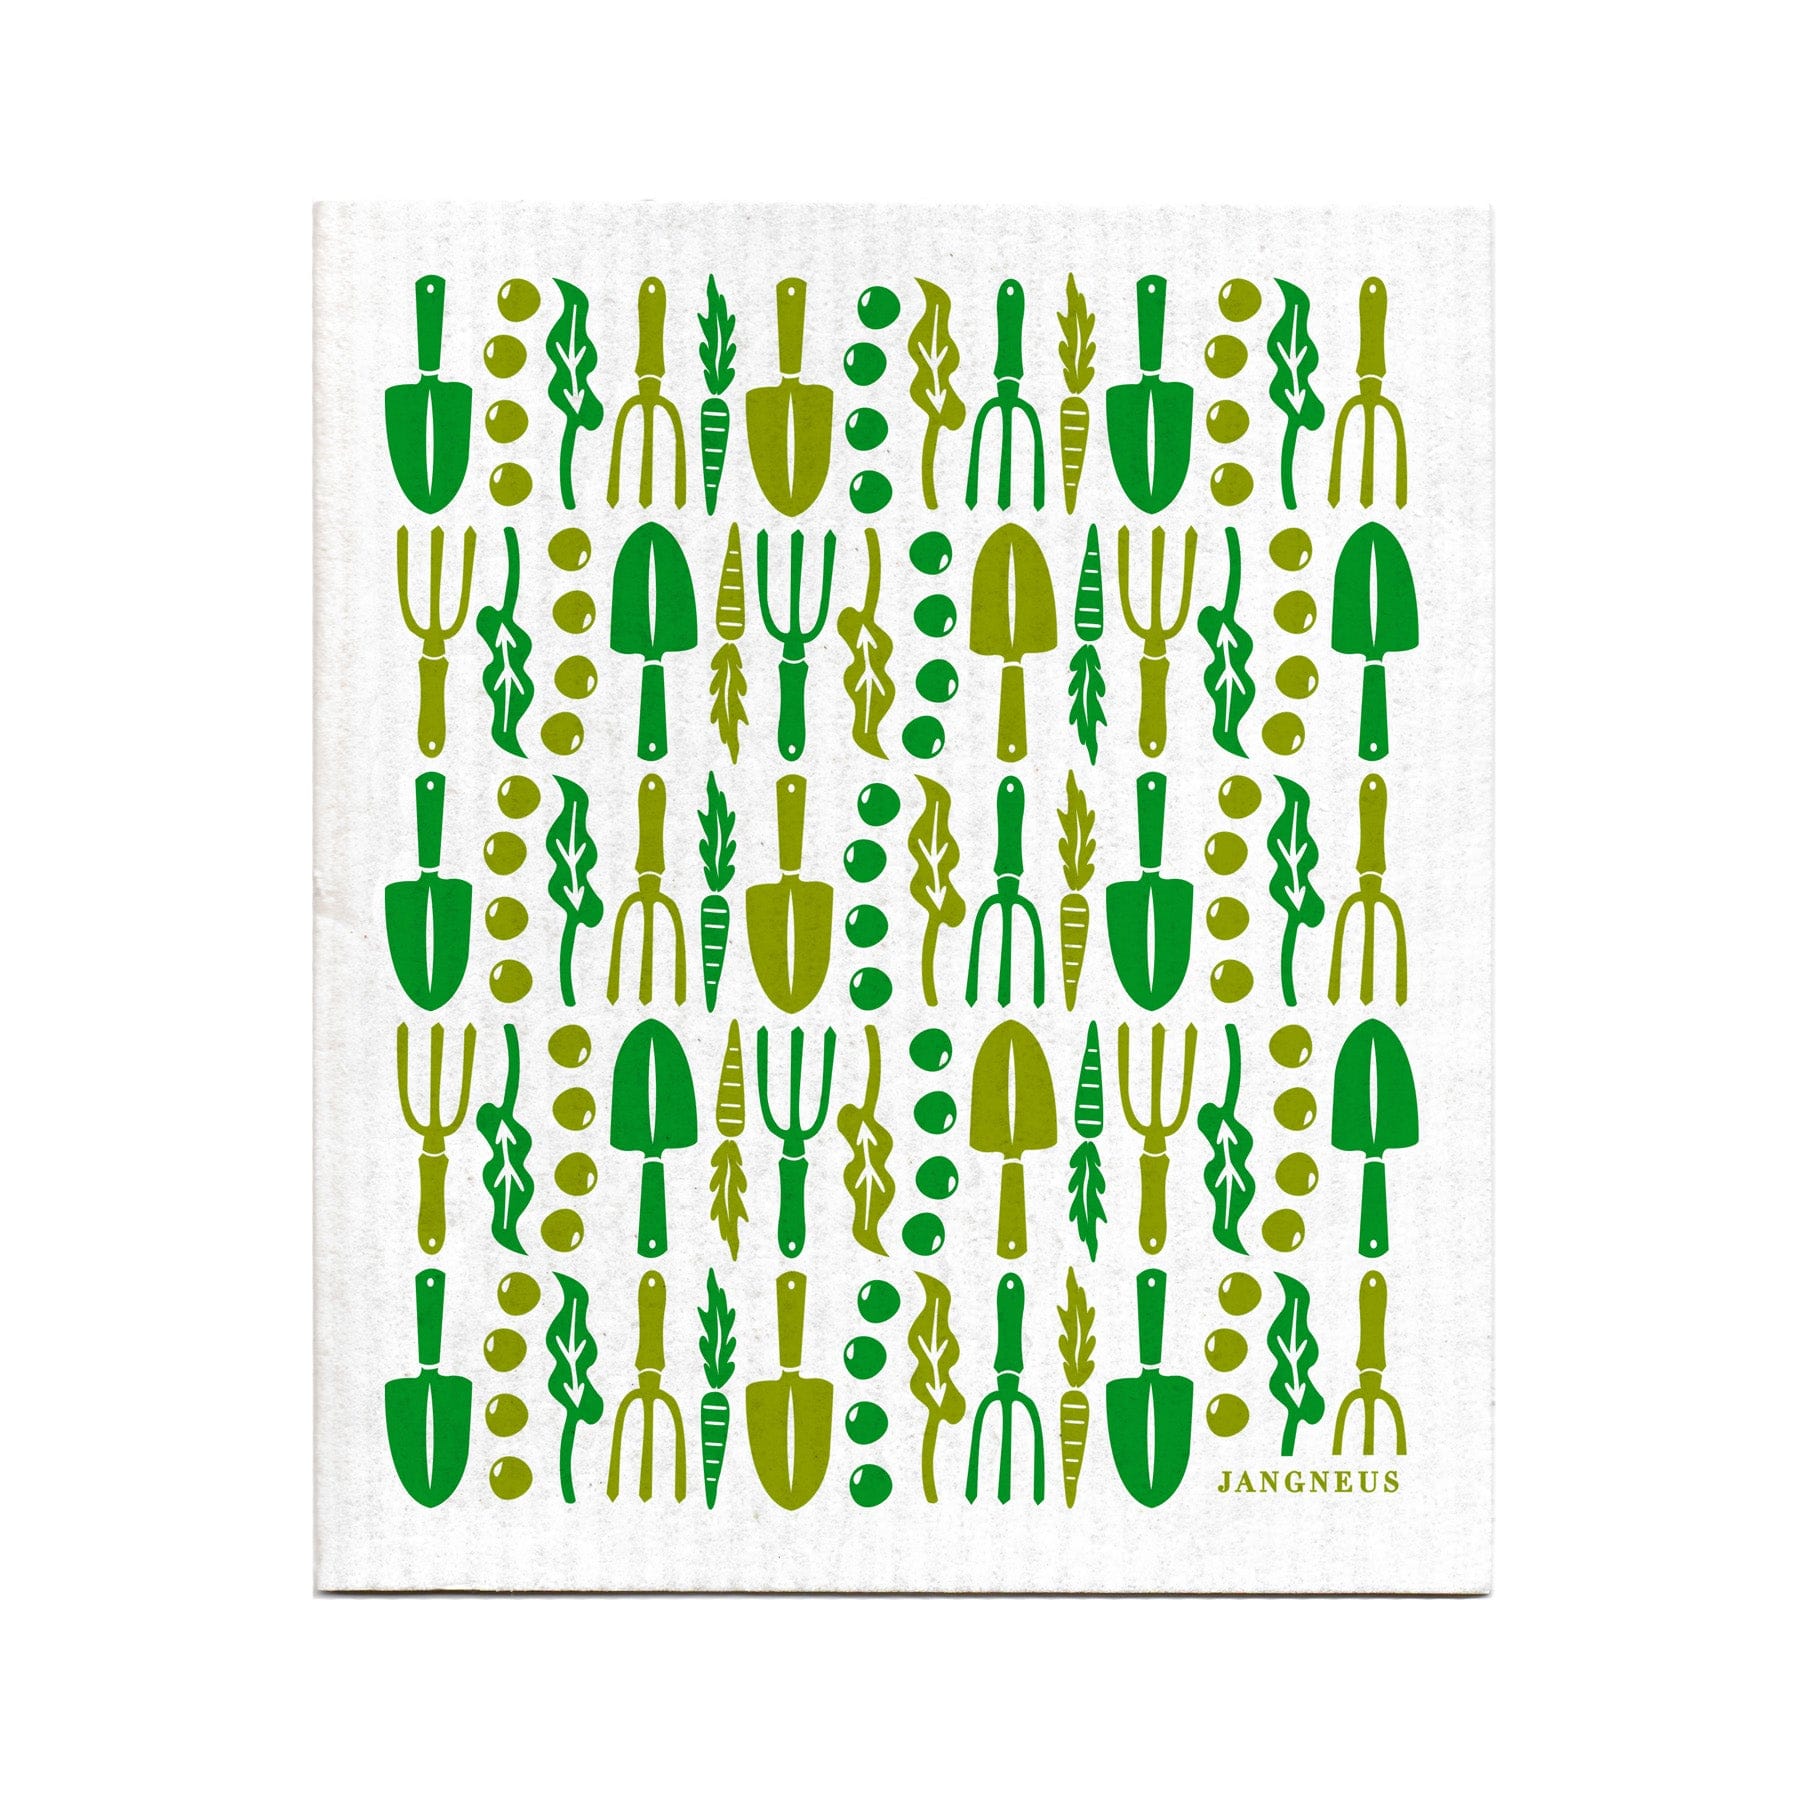 Green and yellow garden tools patterned dish cloth with shovels, rakes, trowels, and plants design on white background by Jangneus